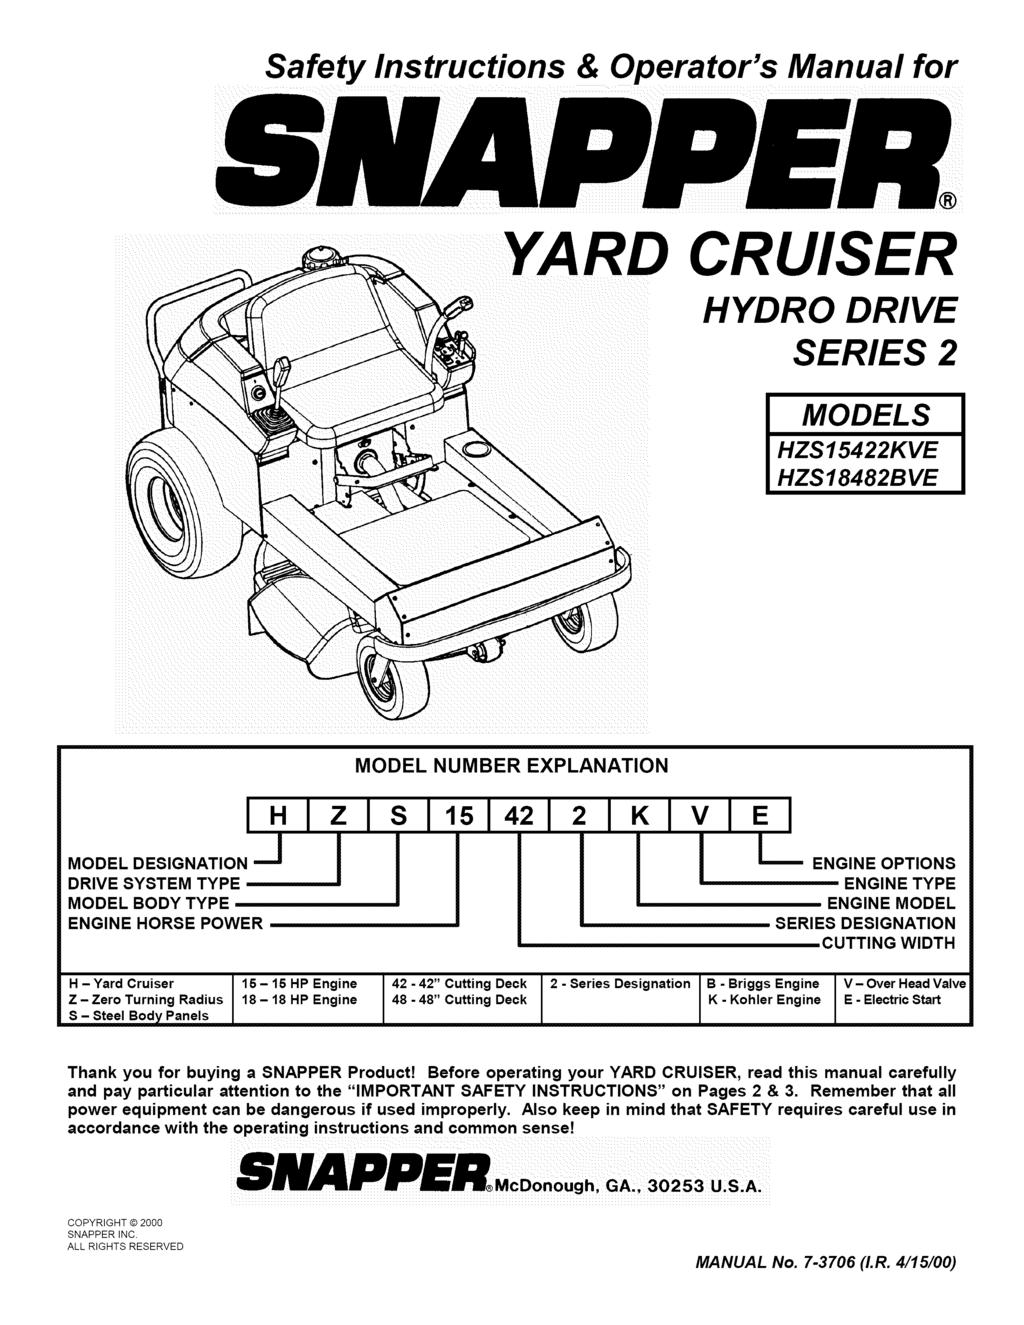 Safety Instructions & Operator's Manual for YARD CRUISER HYDRO DRIVE SERIES 2 MODELS HZS15422KVE HZS18482BVE IHIZlS MODEL NUMBER EXPLANATION lsl42121k VlEI [ ENGINE OPTIONS ENGINE TYPE MODEL